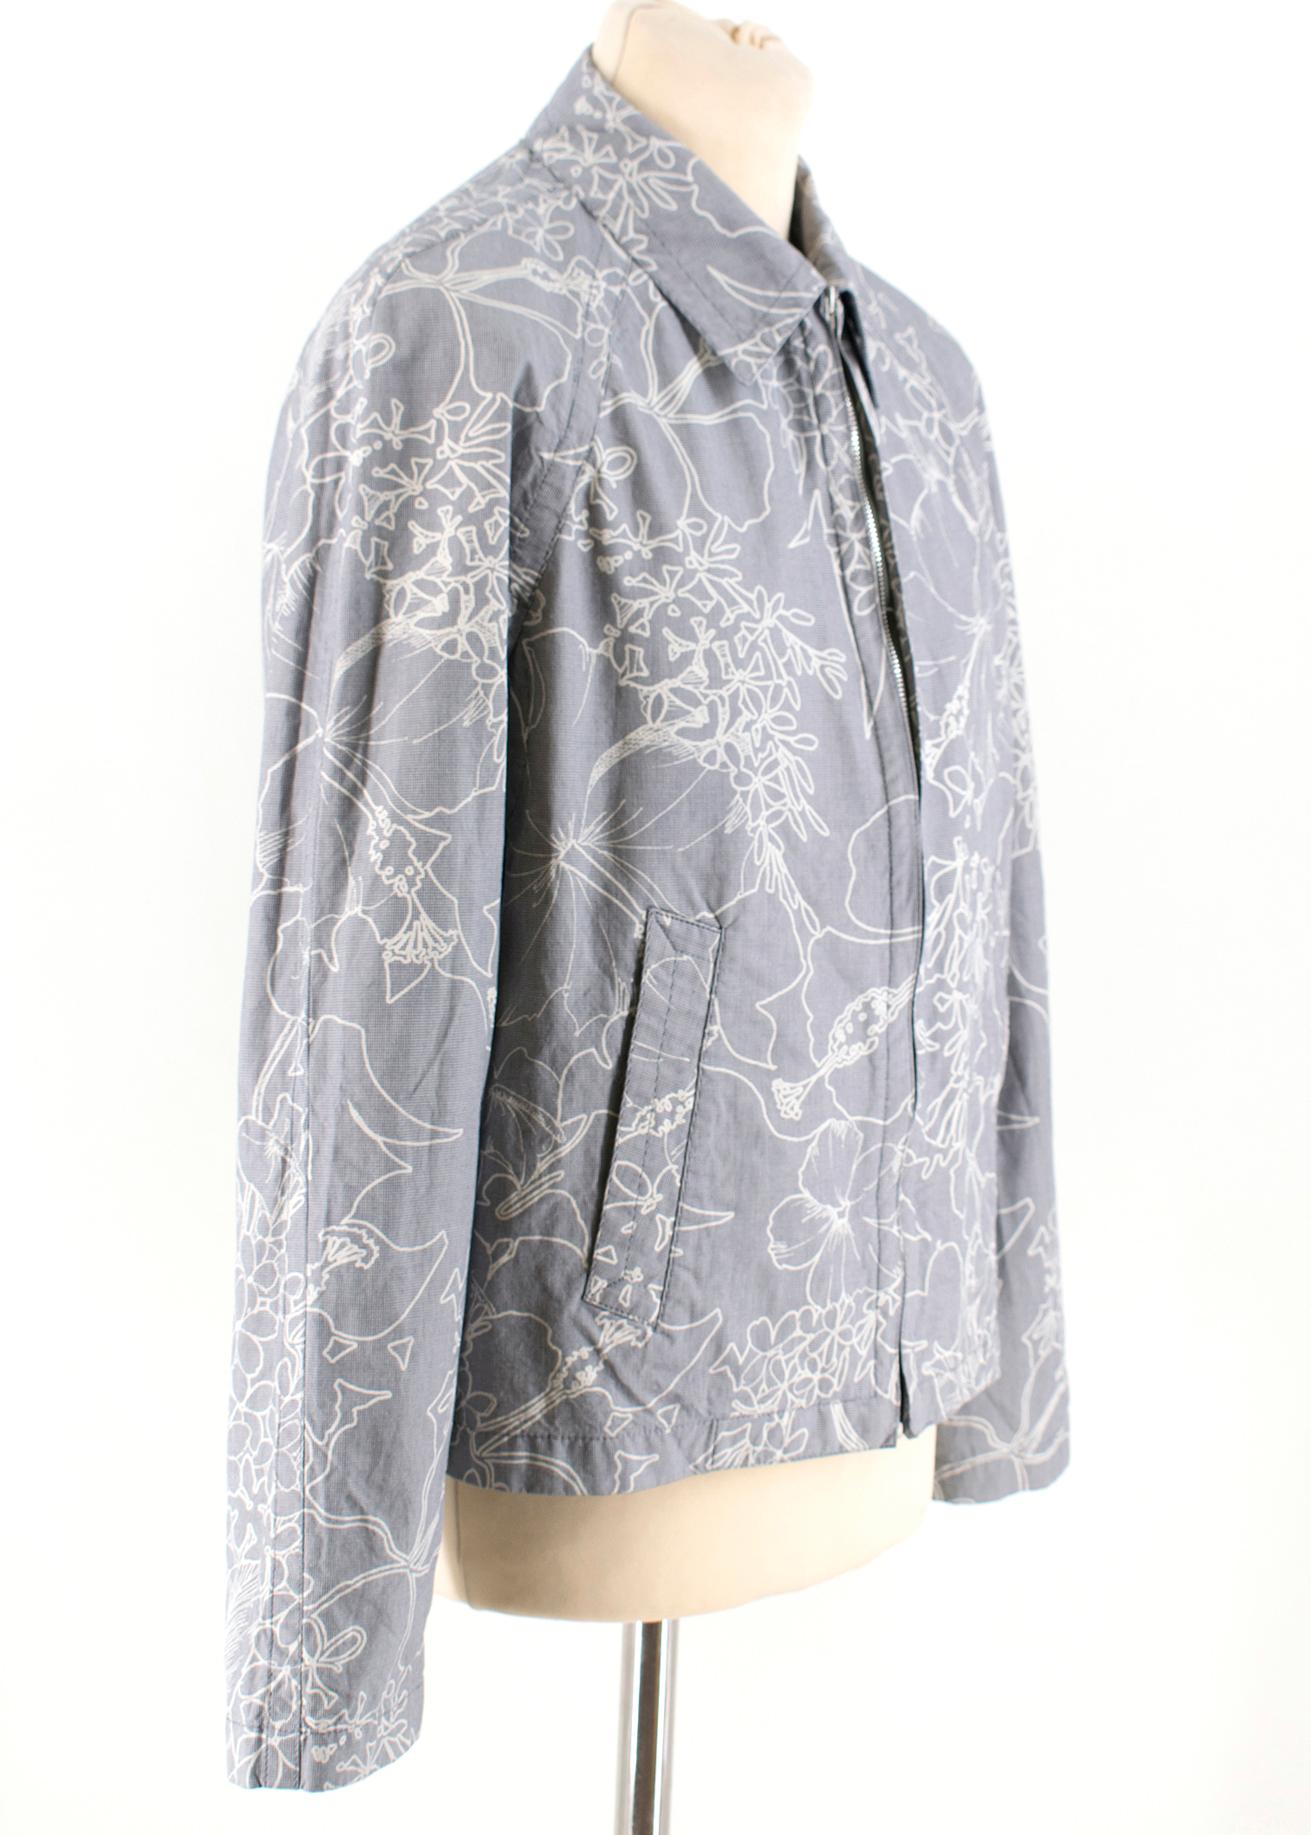 MIU MIU Patterned Cotton Zip-Up Jacket

- Front Zip Closure 
- Pointed Collar 
- Two Side Slip Pockets
- Lightweight 
- Patterned Design Throughout 

100% Cotton 

Made in Italy

Dry Clean Only 

Please note, these items are pre-owned and may show